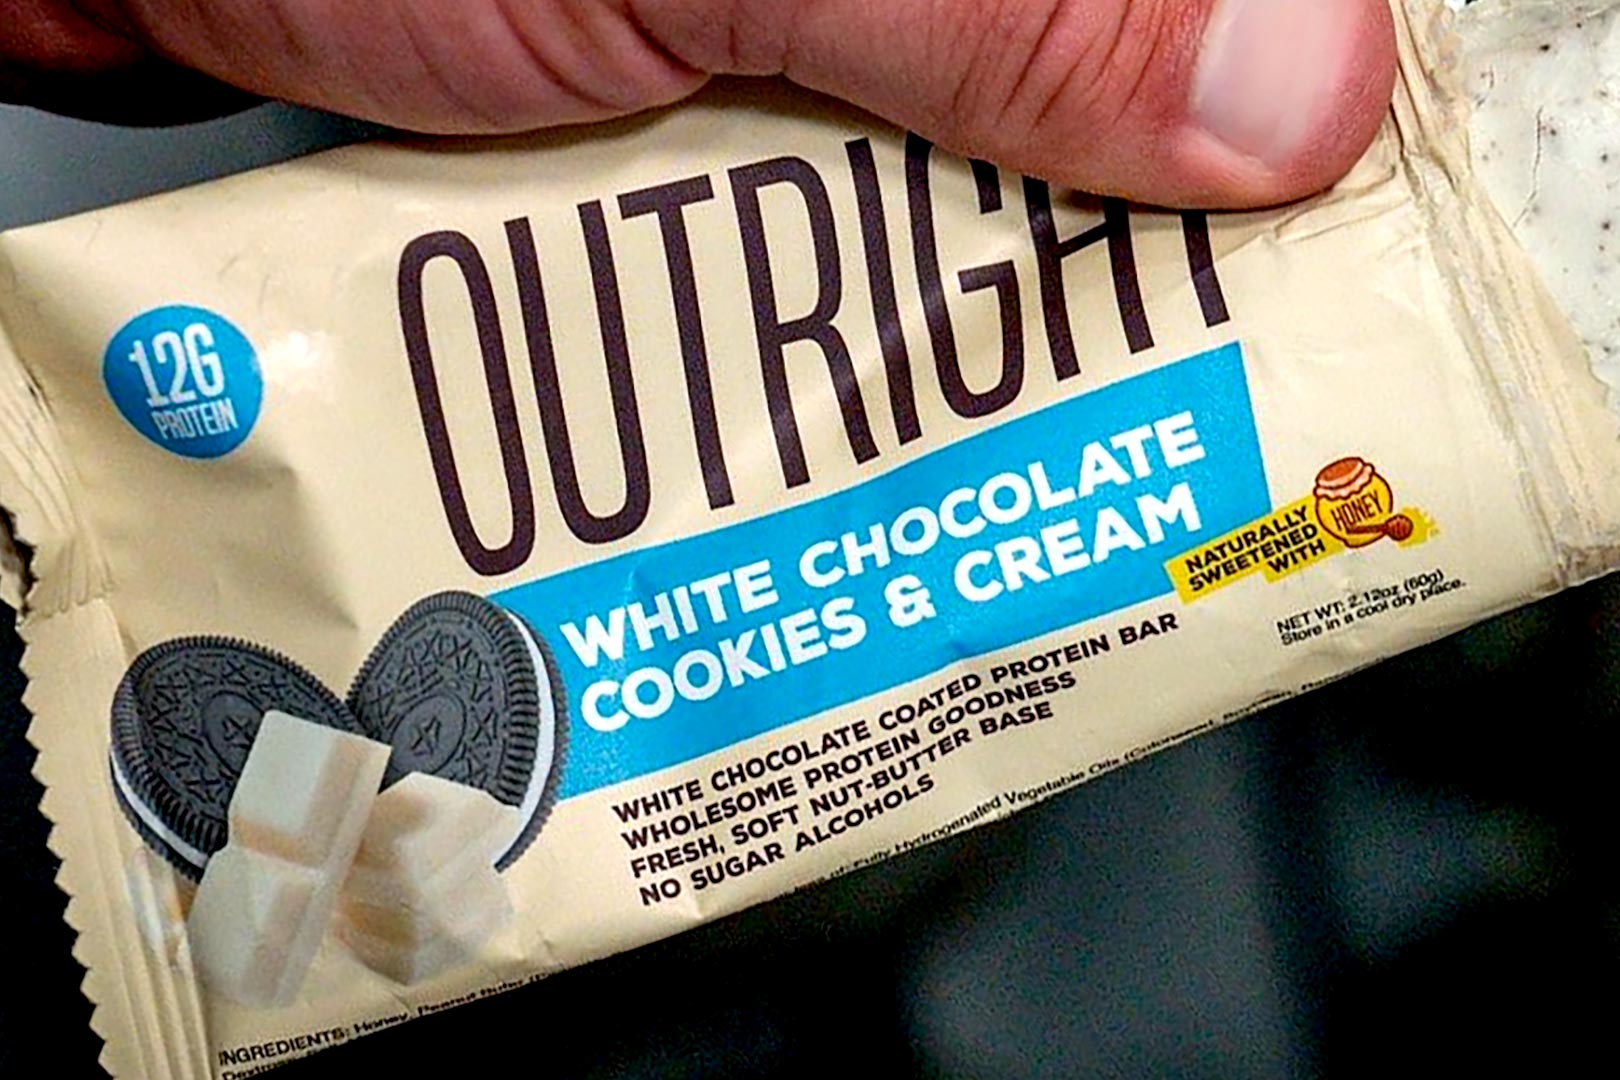 White Chocolate Cookies And Cream Outright Protein Bar